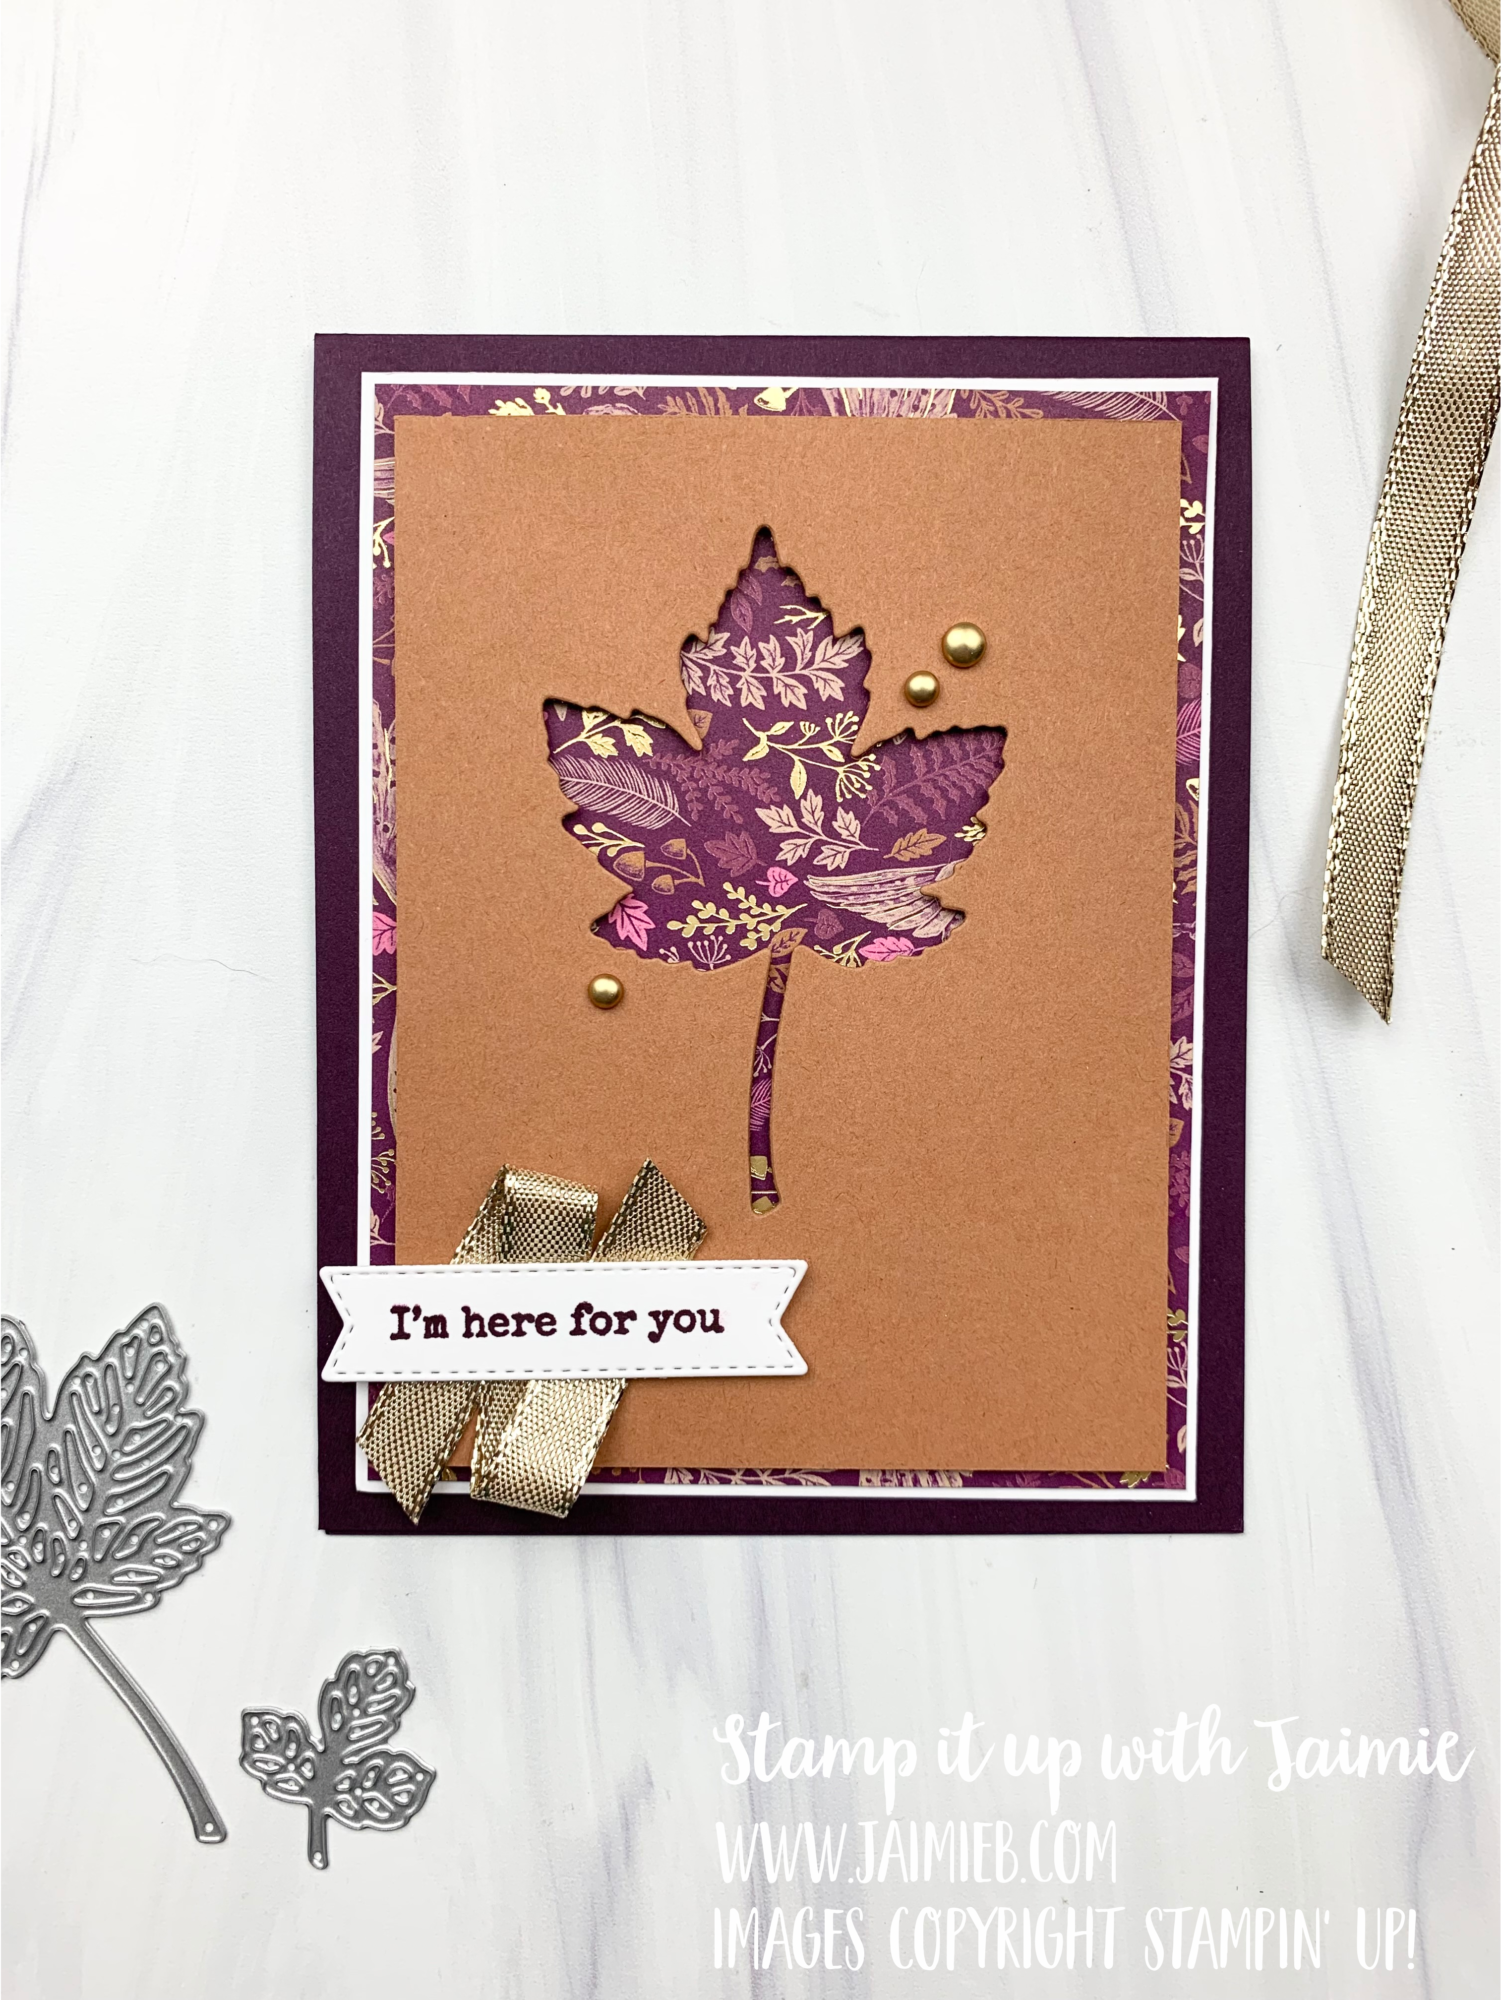 Stampin’ Up! Gorgeous Leaves Card